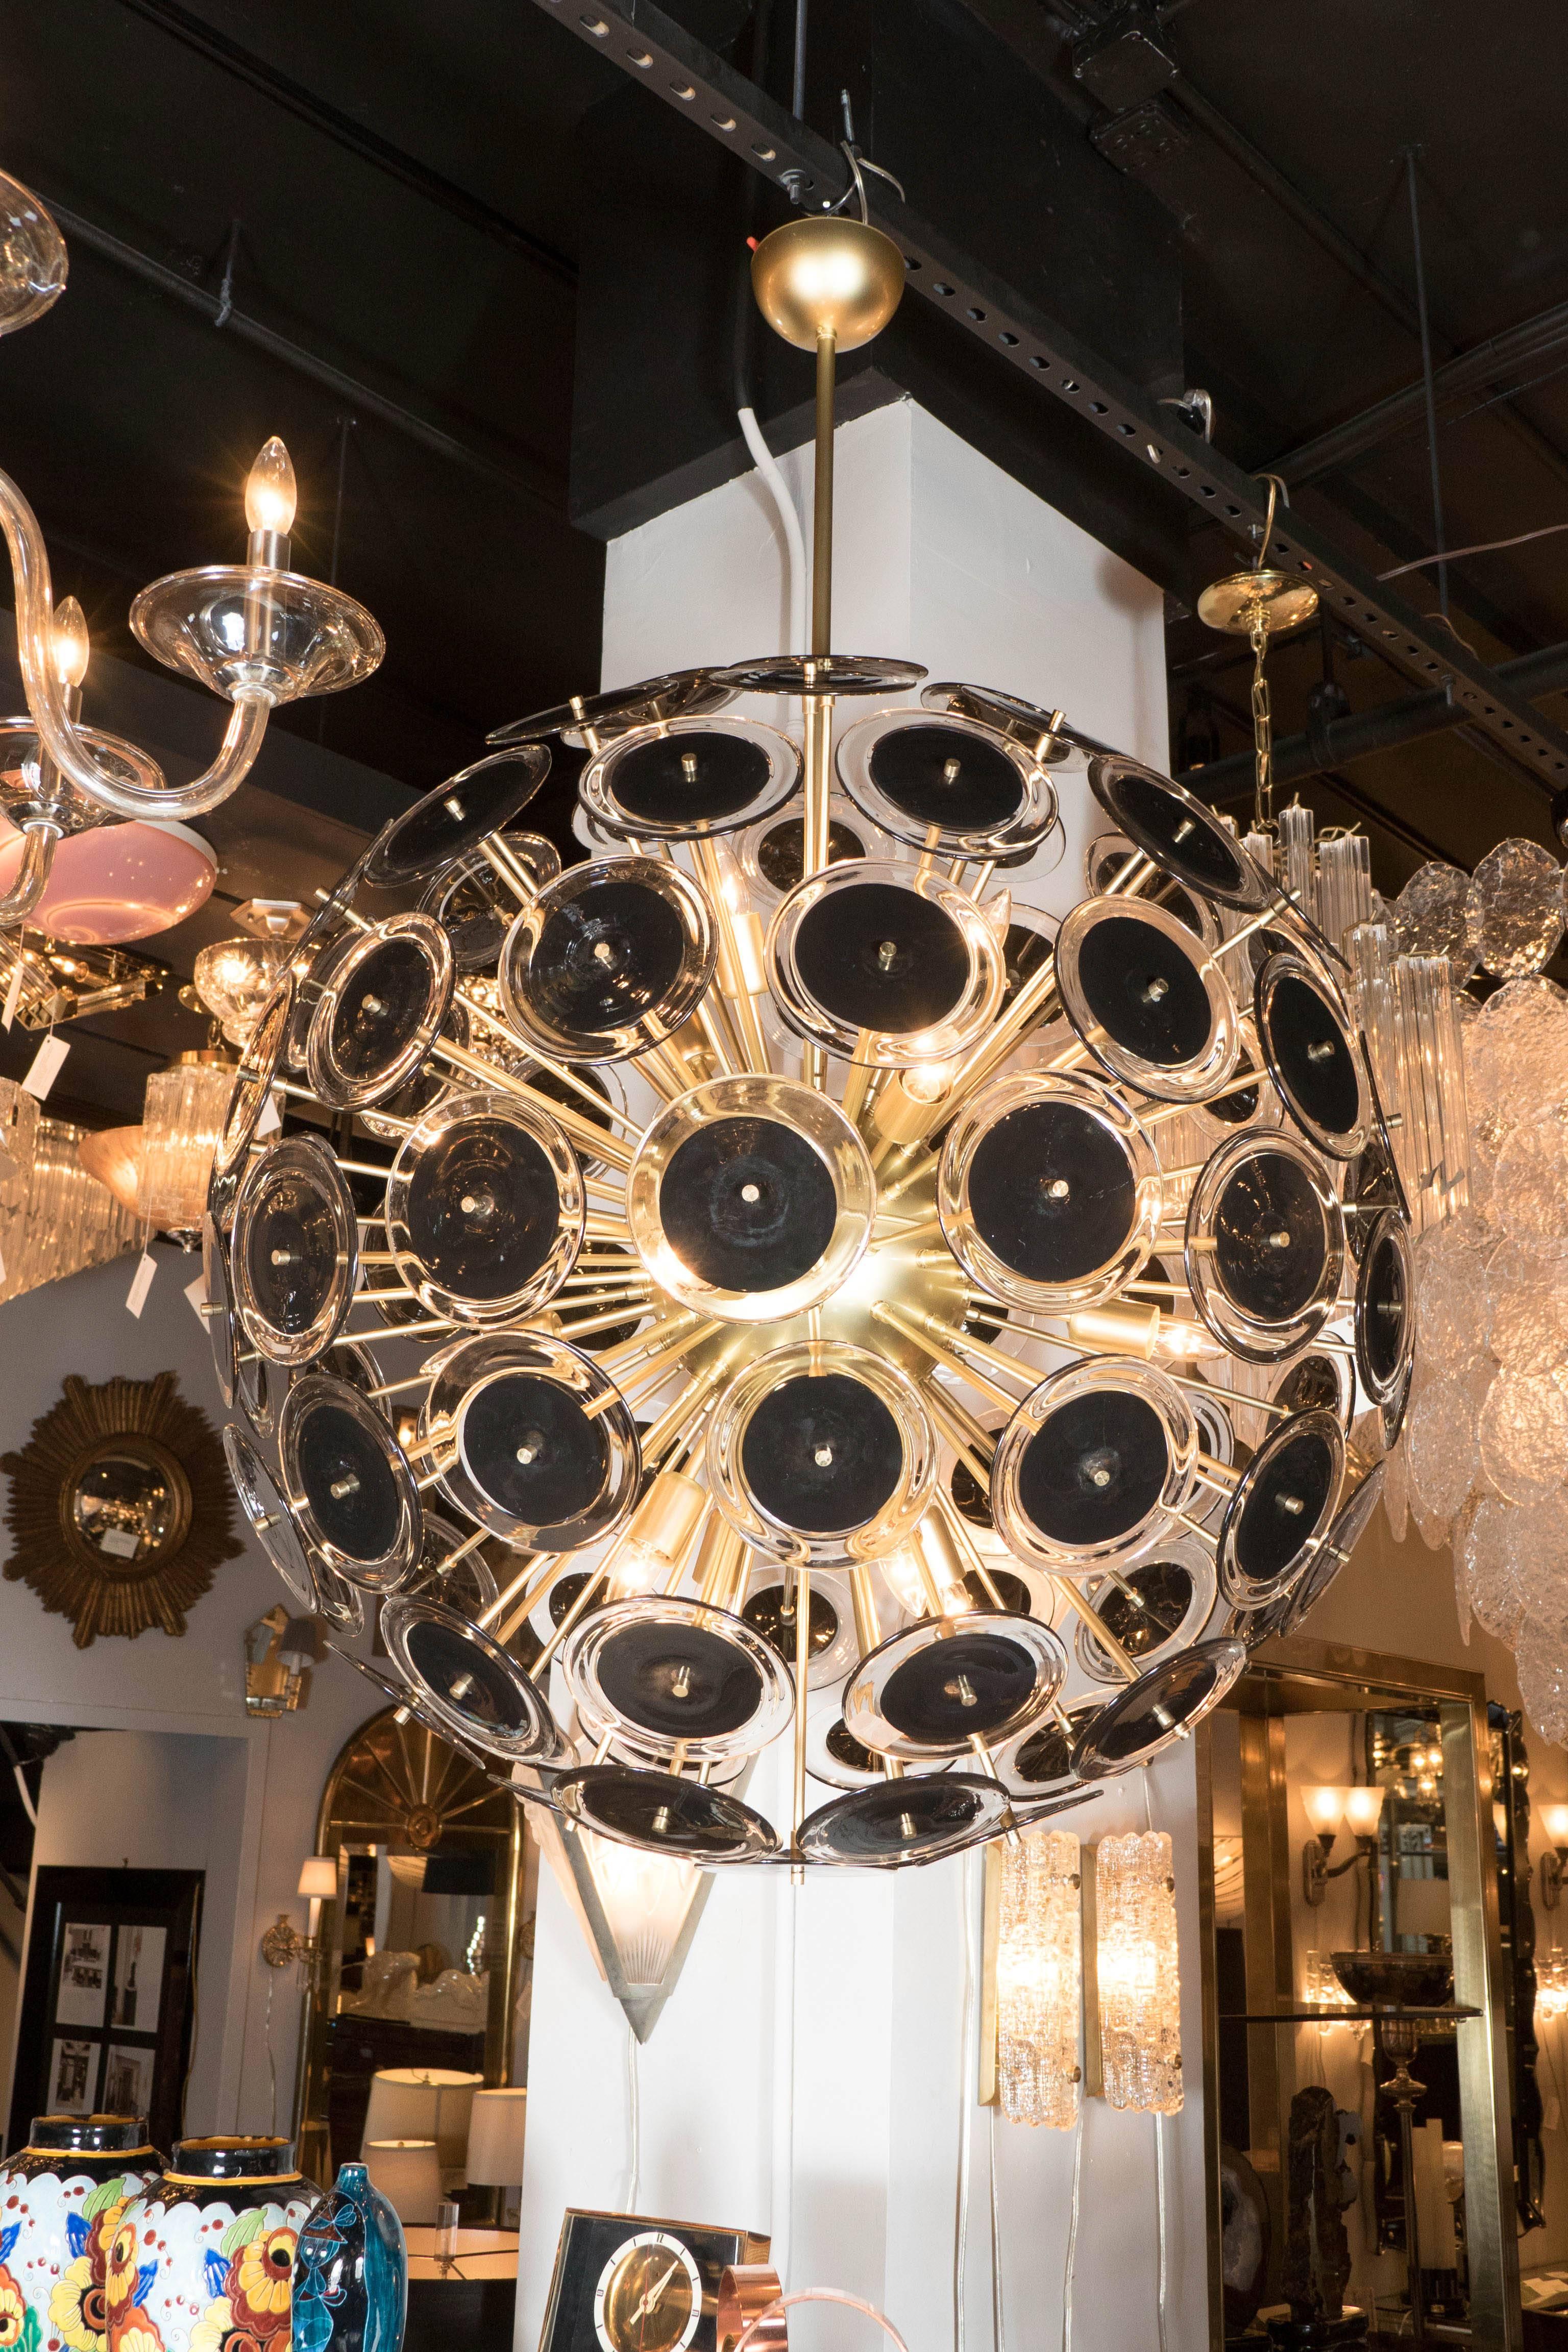 This stunning modernist Sputnik chandelier was realized in Murano, Italy- the island off the coast of Venice renowned for centuries for its superlative glass production. It features a satin finished brass frame with a spherical core from which an